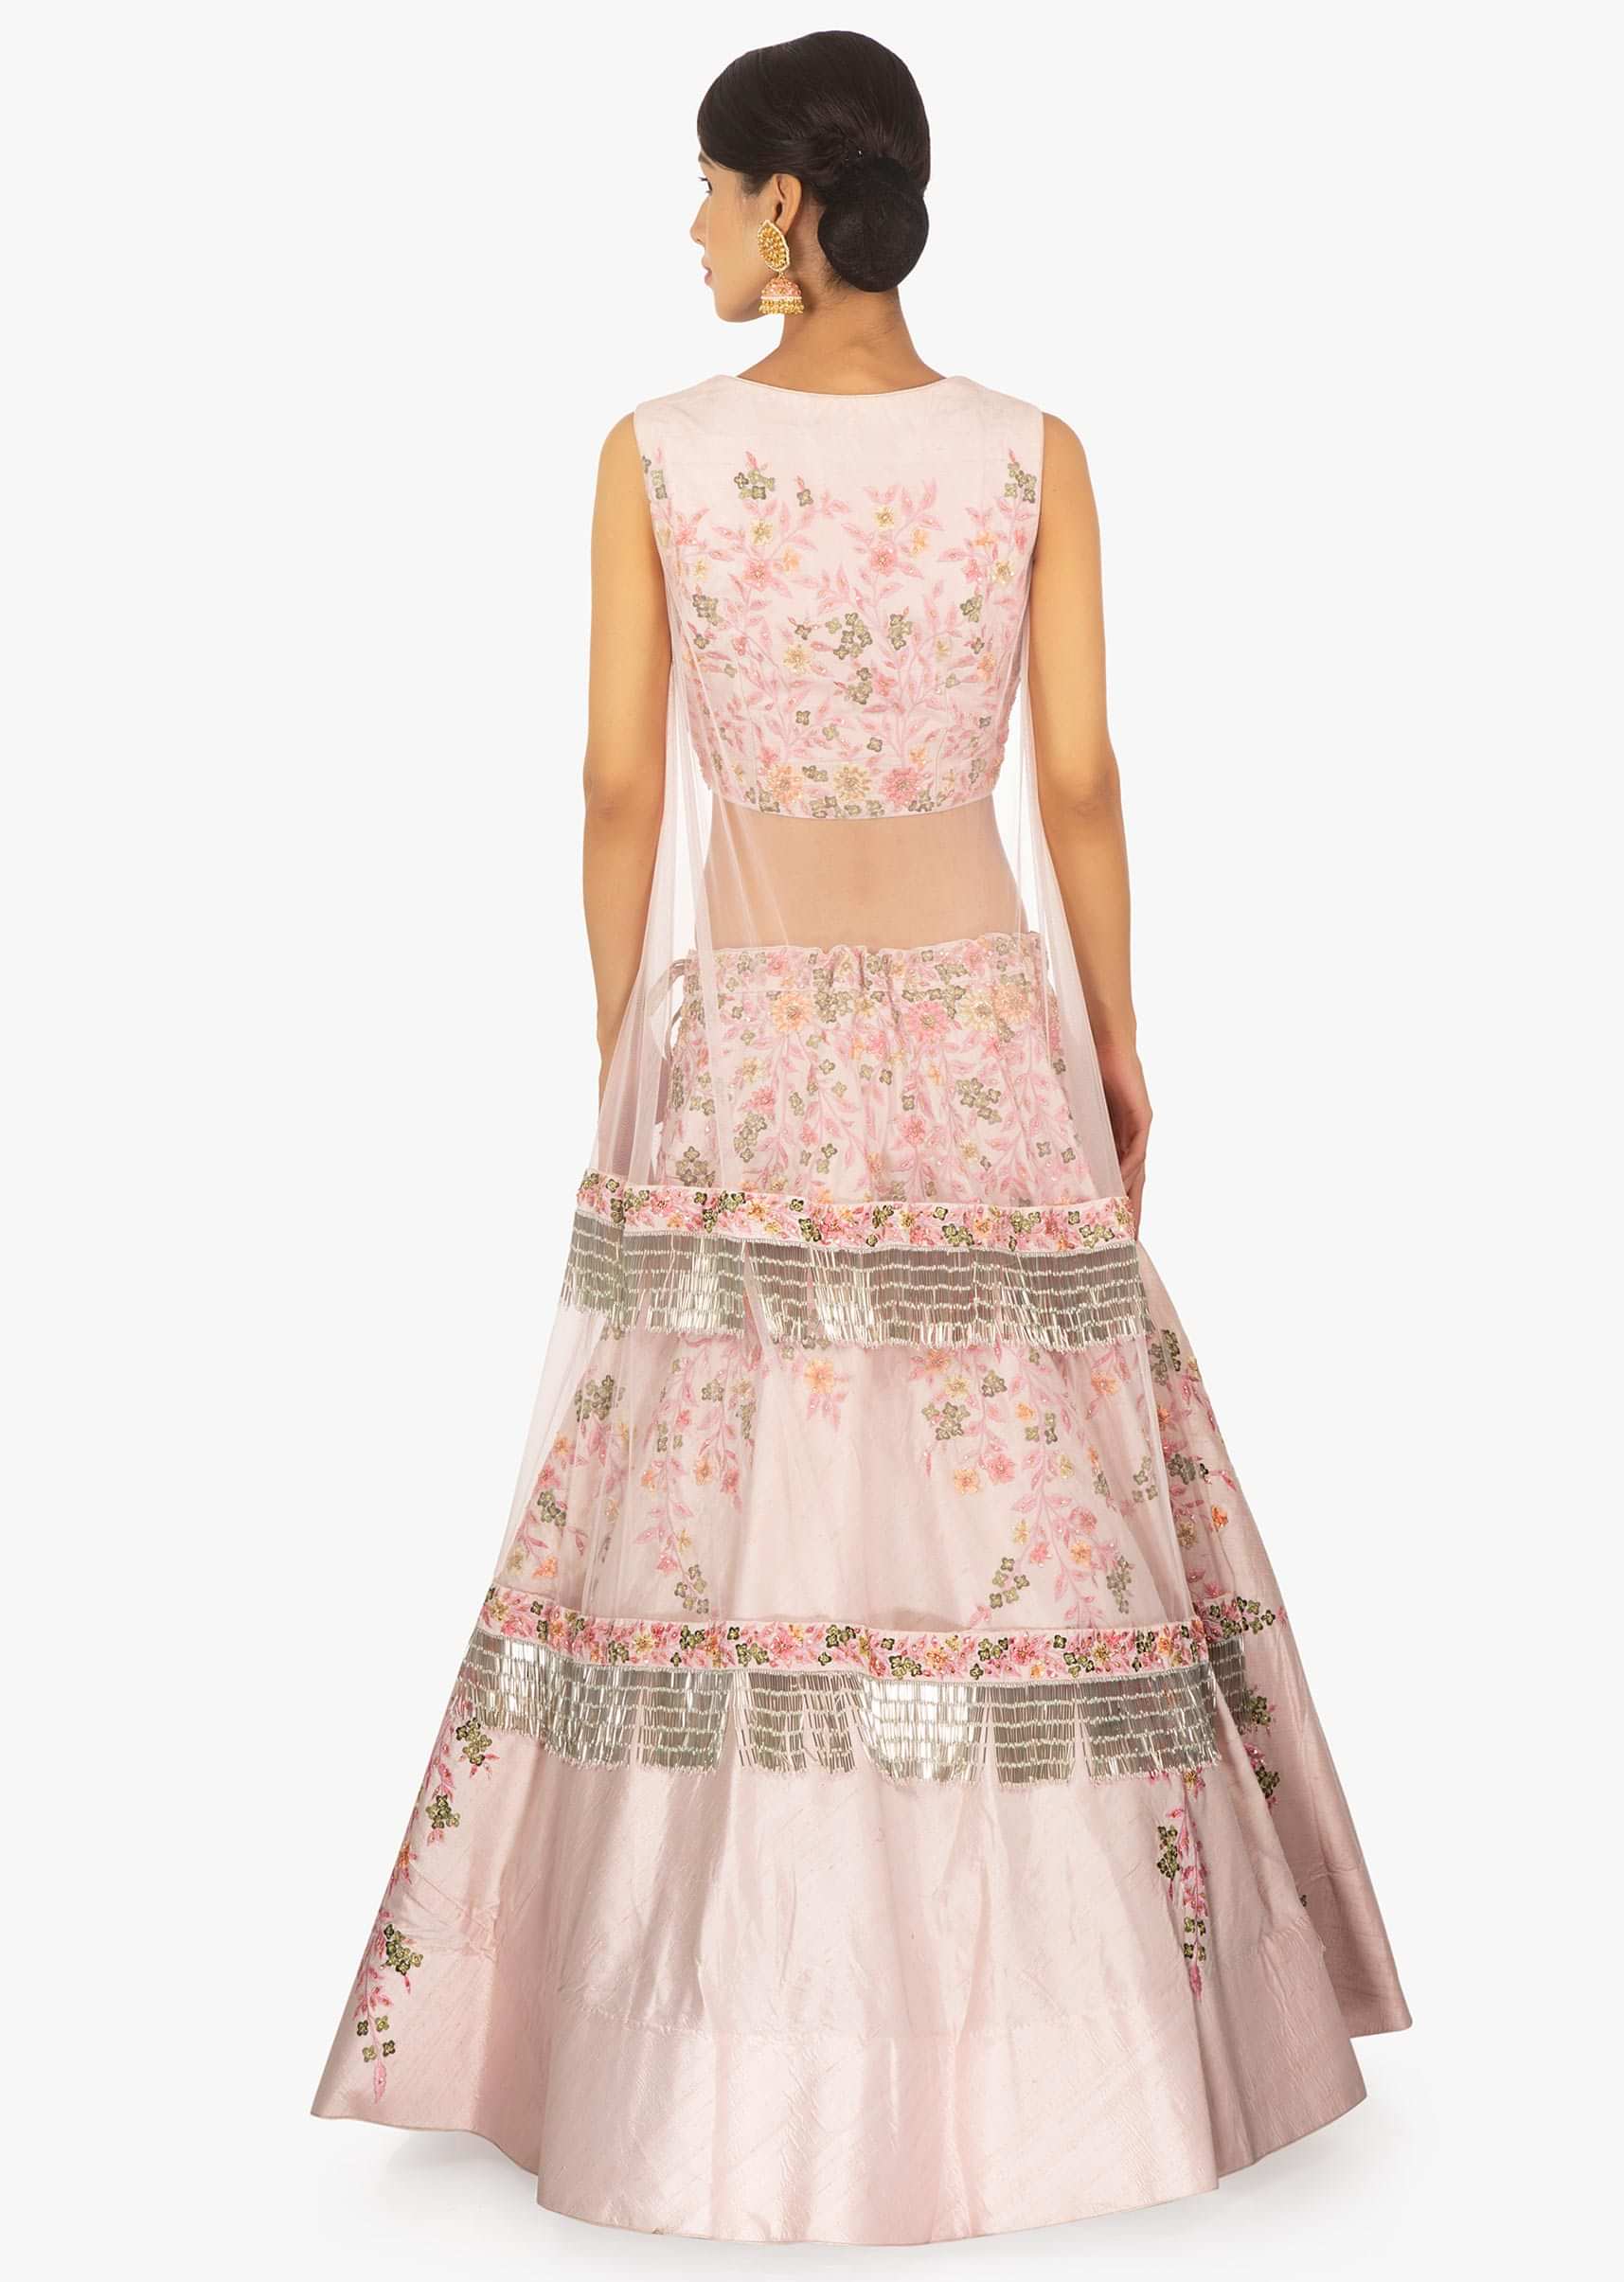 Powder pink lehenga paired with a matching blouse with a preattached net jacket